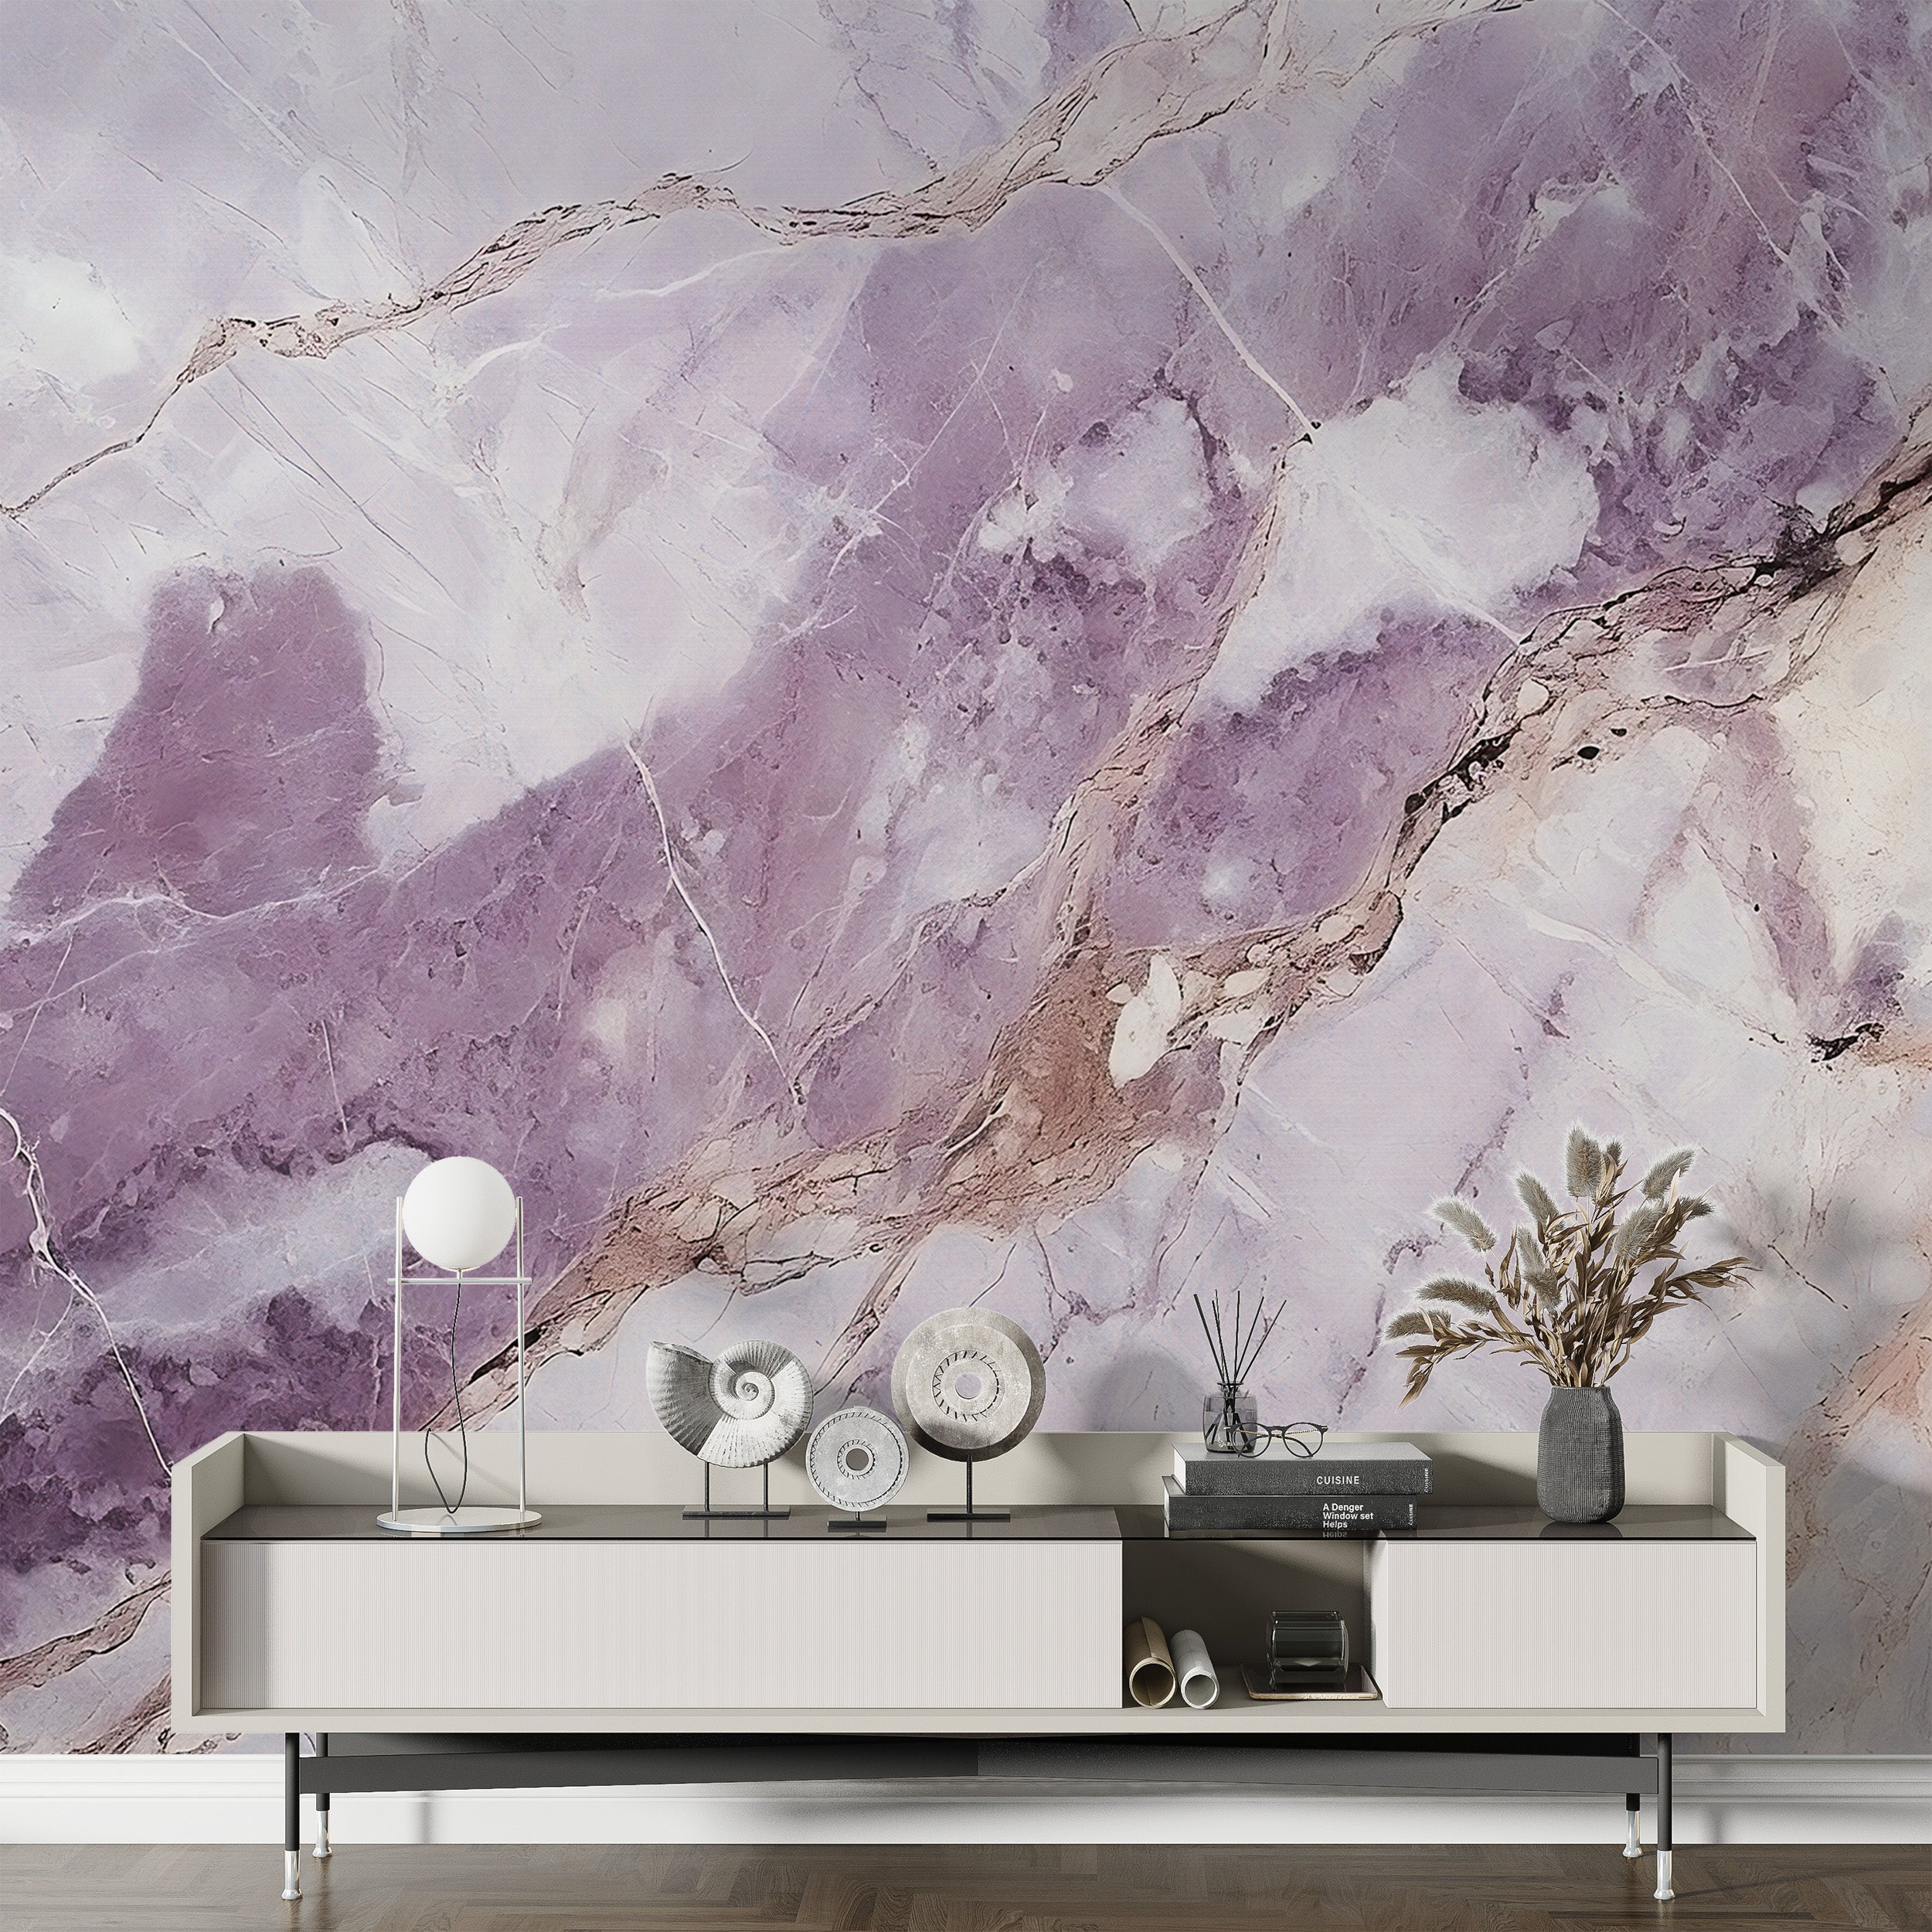 Custom Size Wall Mural Tailored to Enhance Your Space